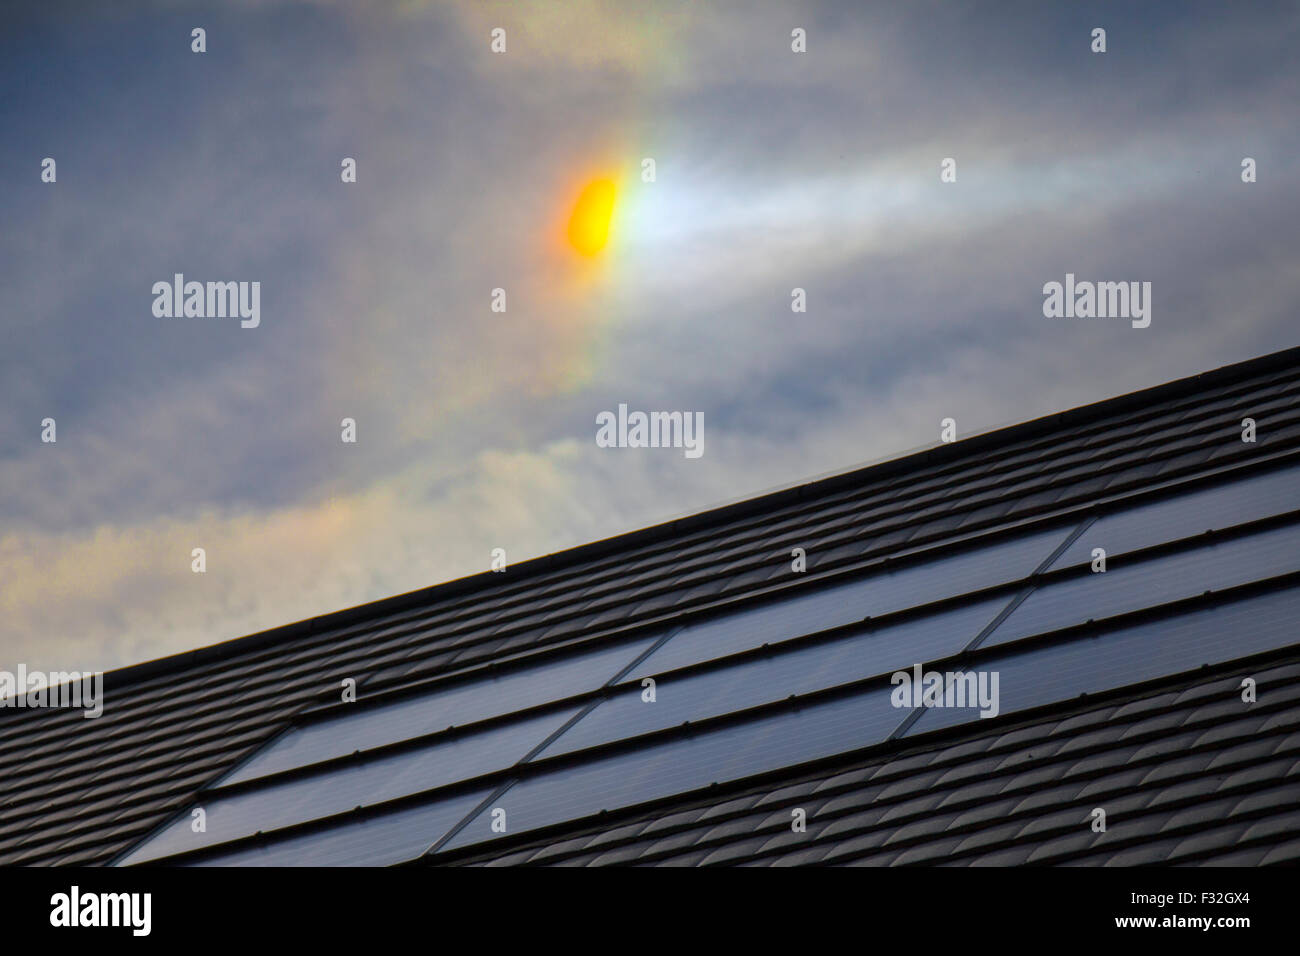 Chorley, Lancashire, UK. 28th September, 2015. UK Weather: Optical phenomena over roof with solar panel. The circumzenithal and circumhorizontal arcs are two related optical phenomena similar in appearance to a rainbow, but unlike the latter, their origin lies in light refraction through hexagonal ice crystals rather than liquid water droplets. This means that they are not rainbows, but members of the large family of halos. Credit:  Cernan Elias/Alamy Live News Stock Photo